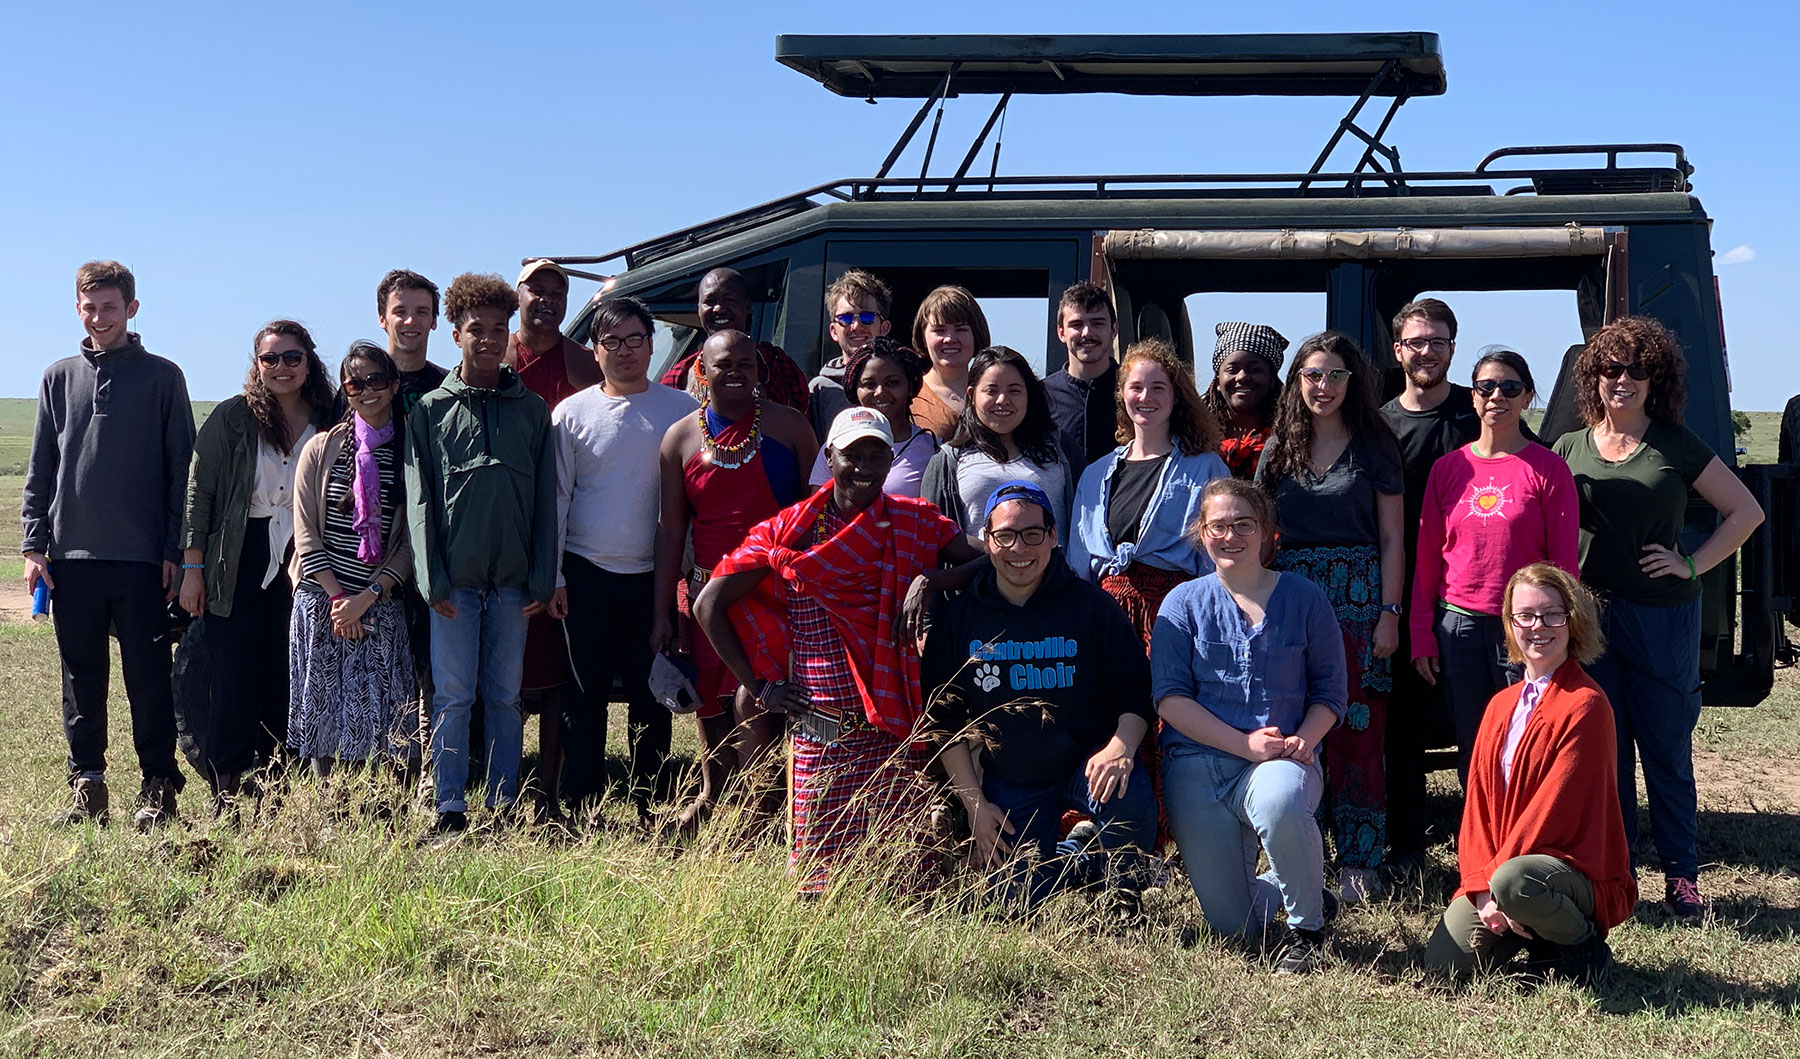 The students were fortunate to experience a two-day safari at the Maasai Mara based at the Sentinel Mara Camp. The safari provided an education in animal and resource conservation.